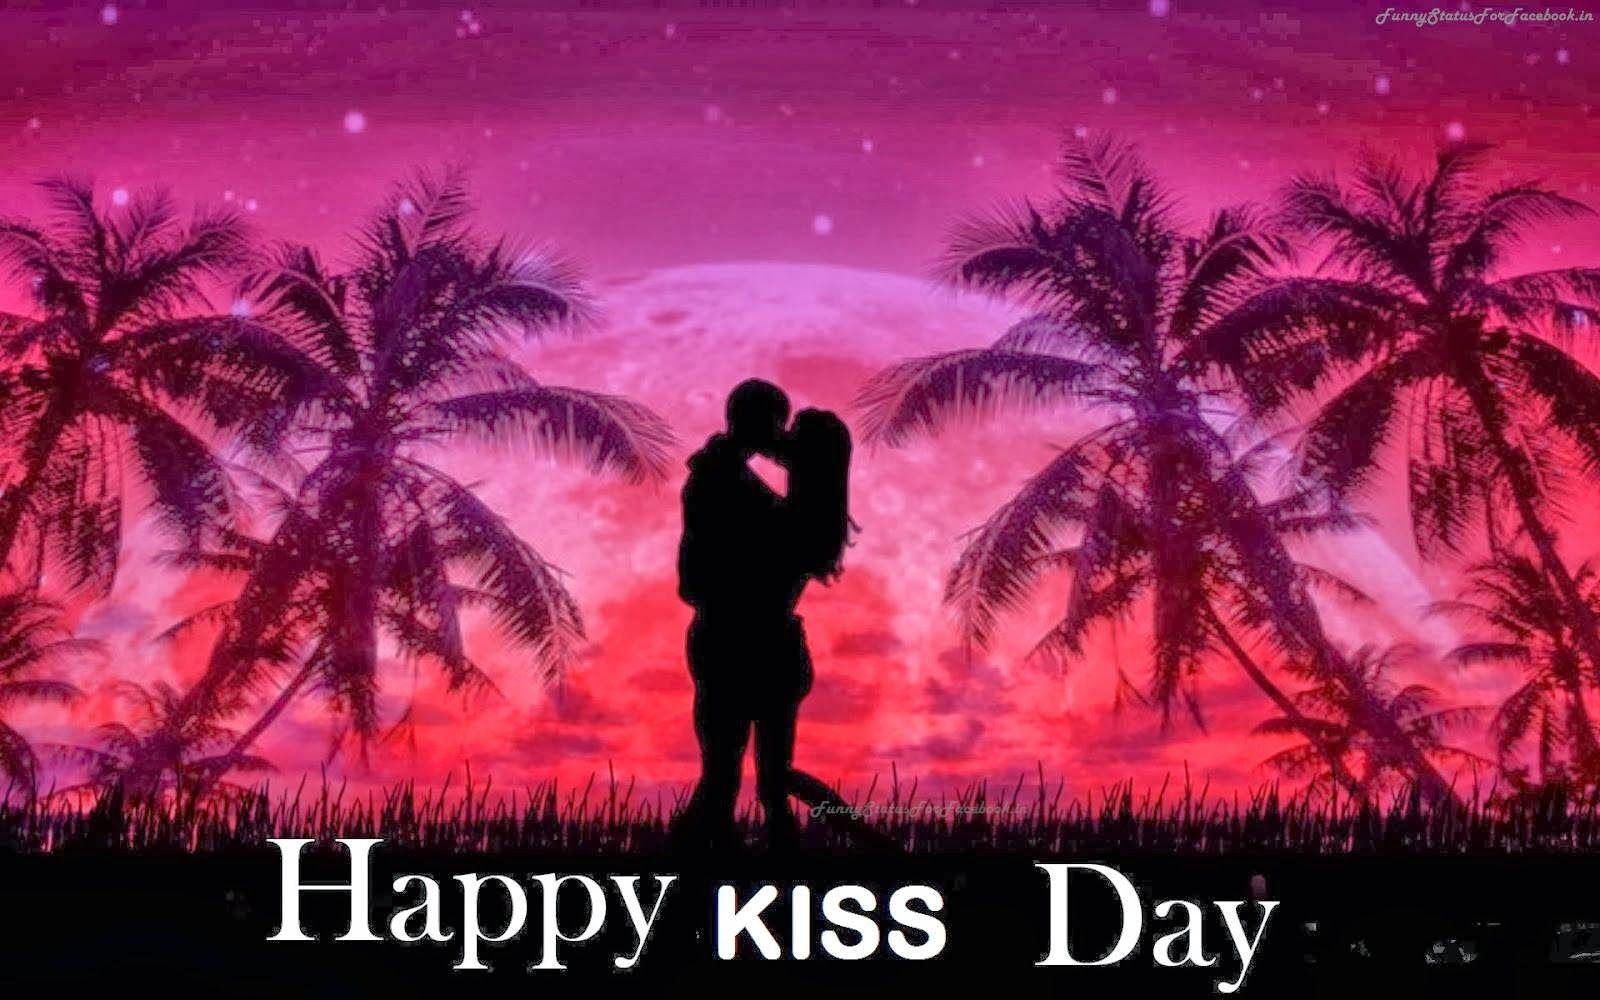 Happy Kiss Day Image Quotes HD Happy Kiss Day Image Quotes HD